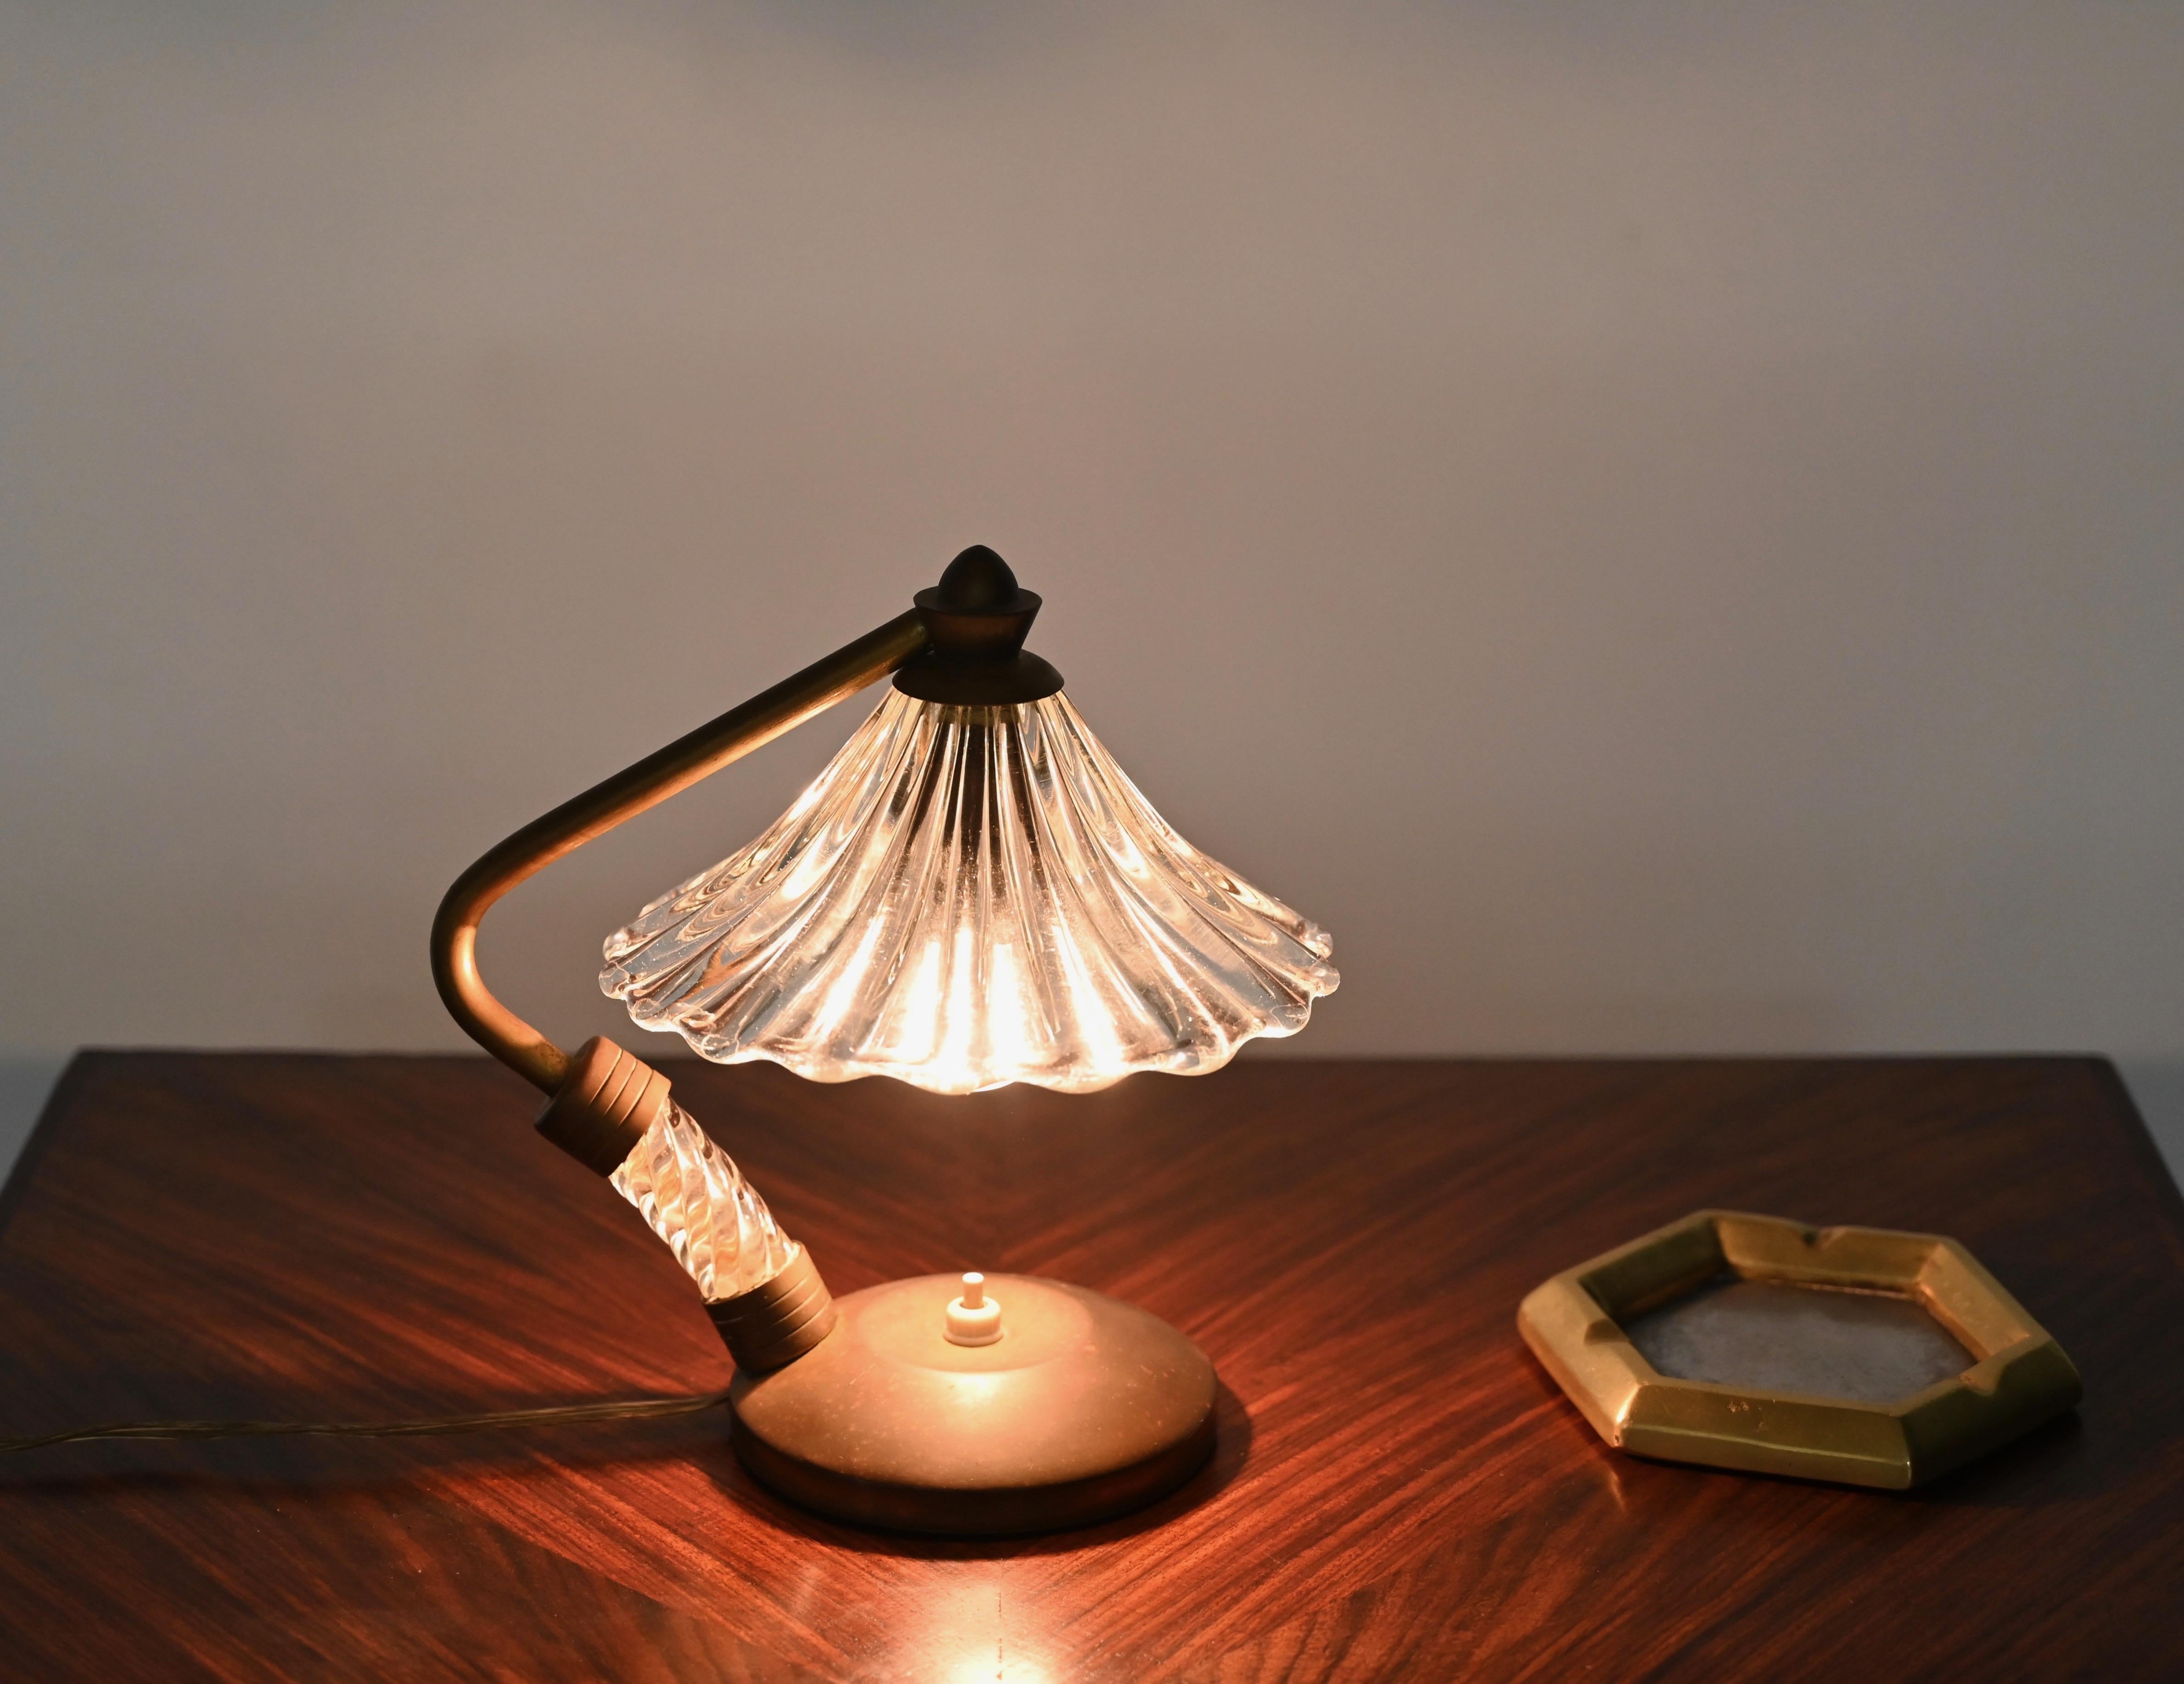 Bellflower Table Lamp in Murano Glass and Brass by Ercole Barovier, Italy 1940s For Sale 7